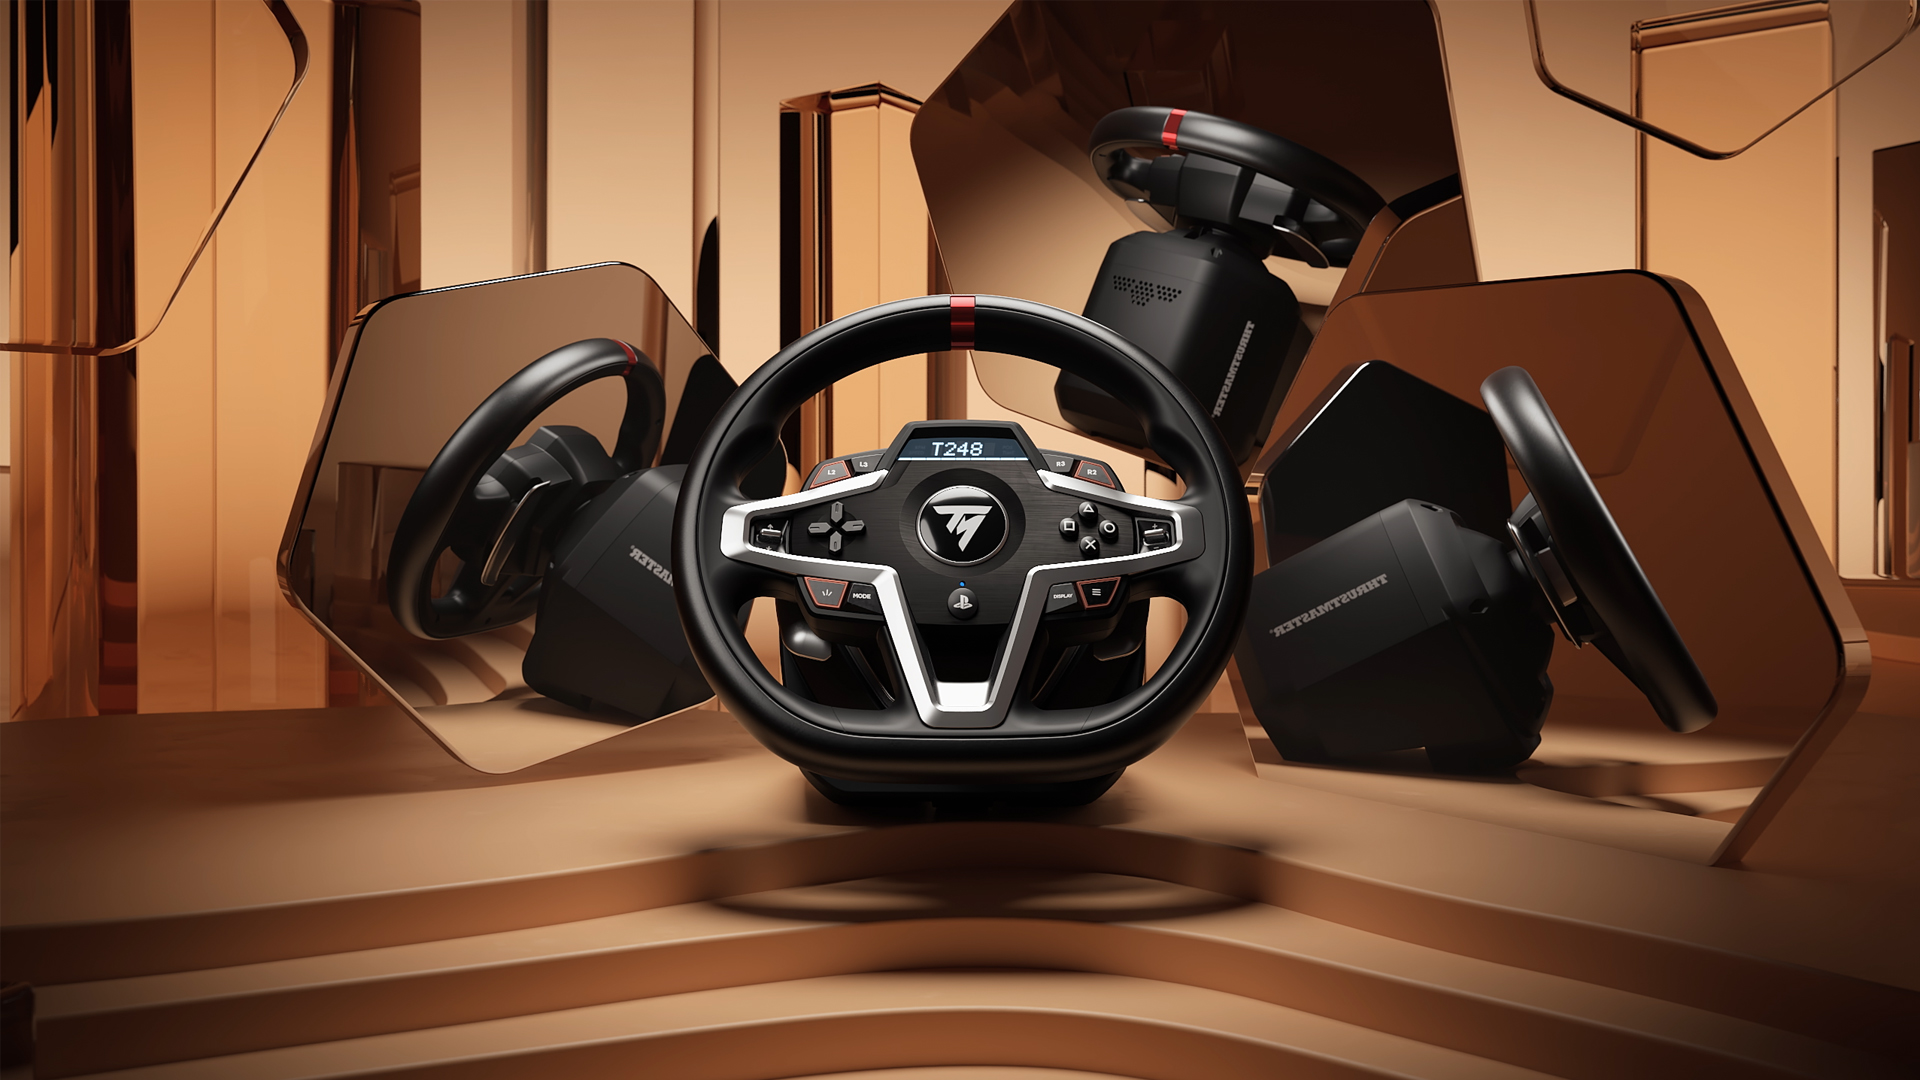 https://banleong.com.sg/wp-content/uploads/2021/12/Thrustmaster-launches-affordable-T248-hybrid-drive-wheel-and-pedal-set.jpg